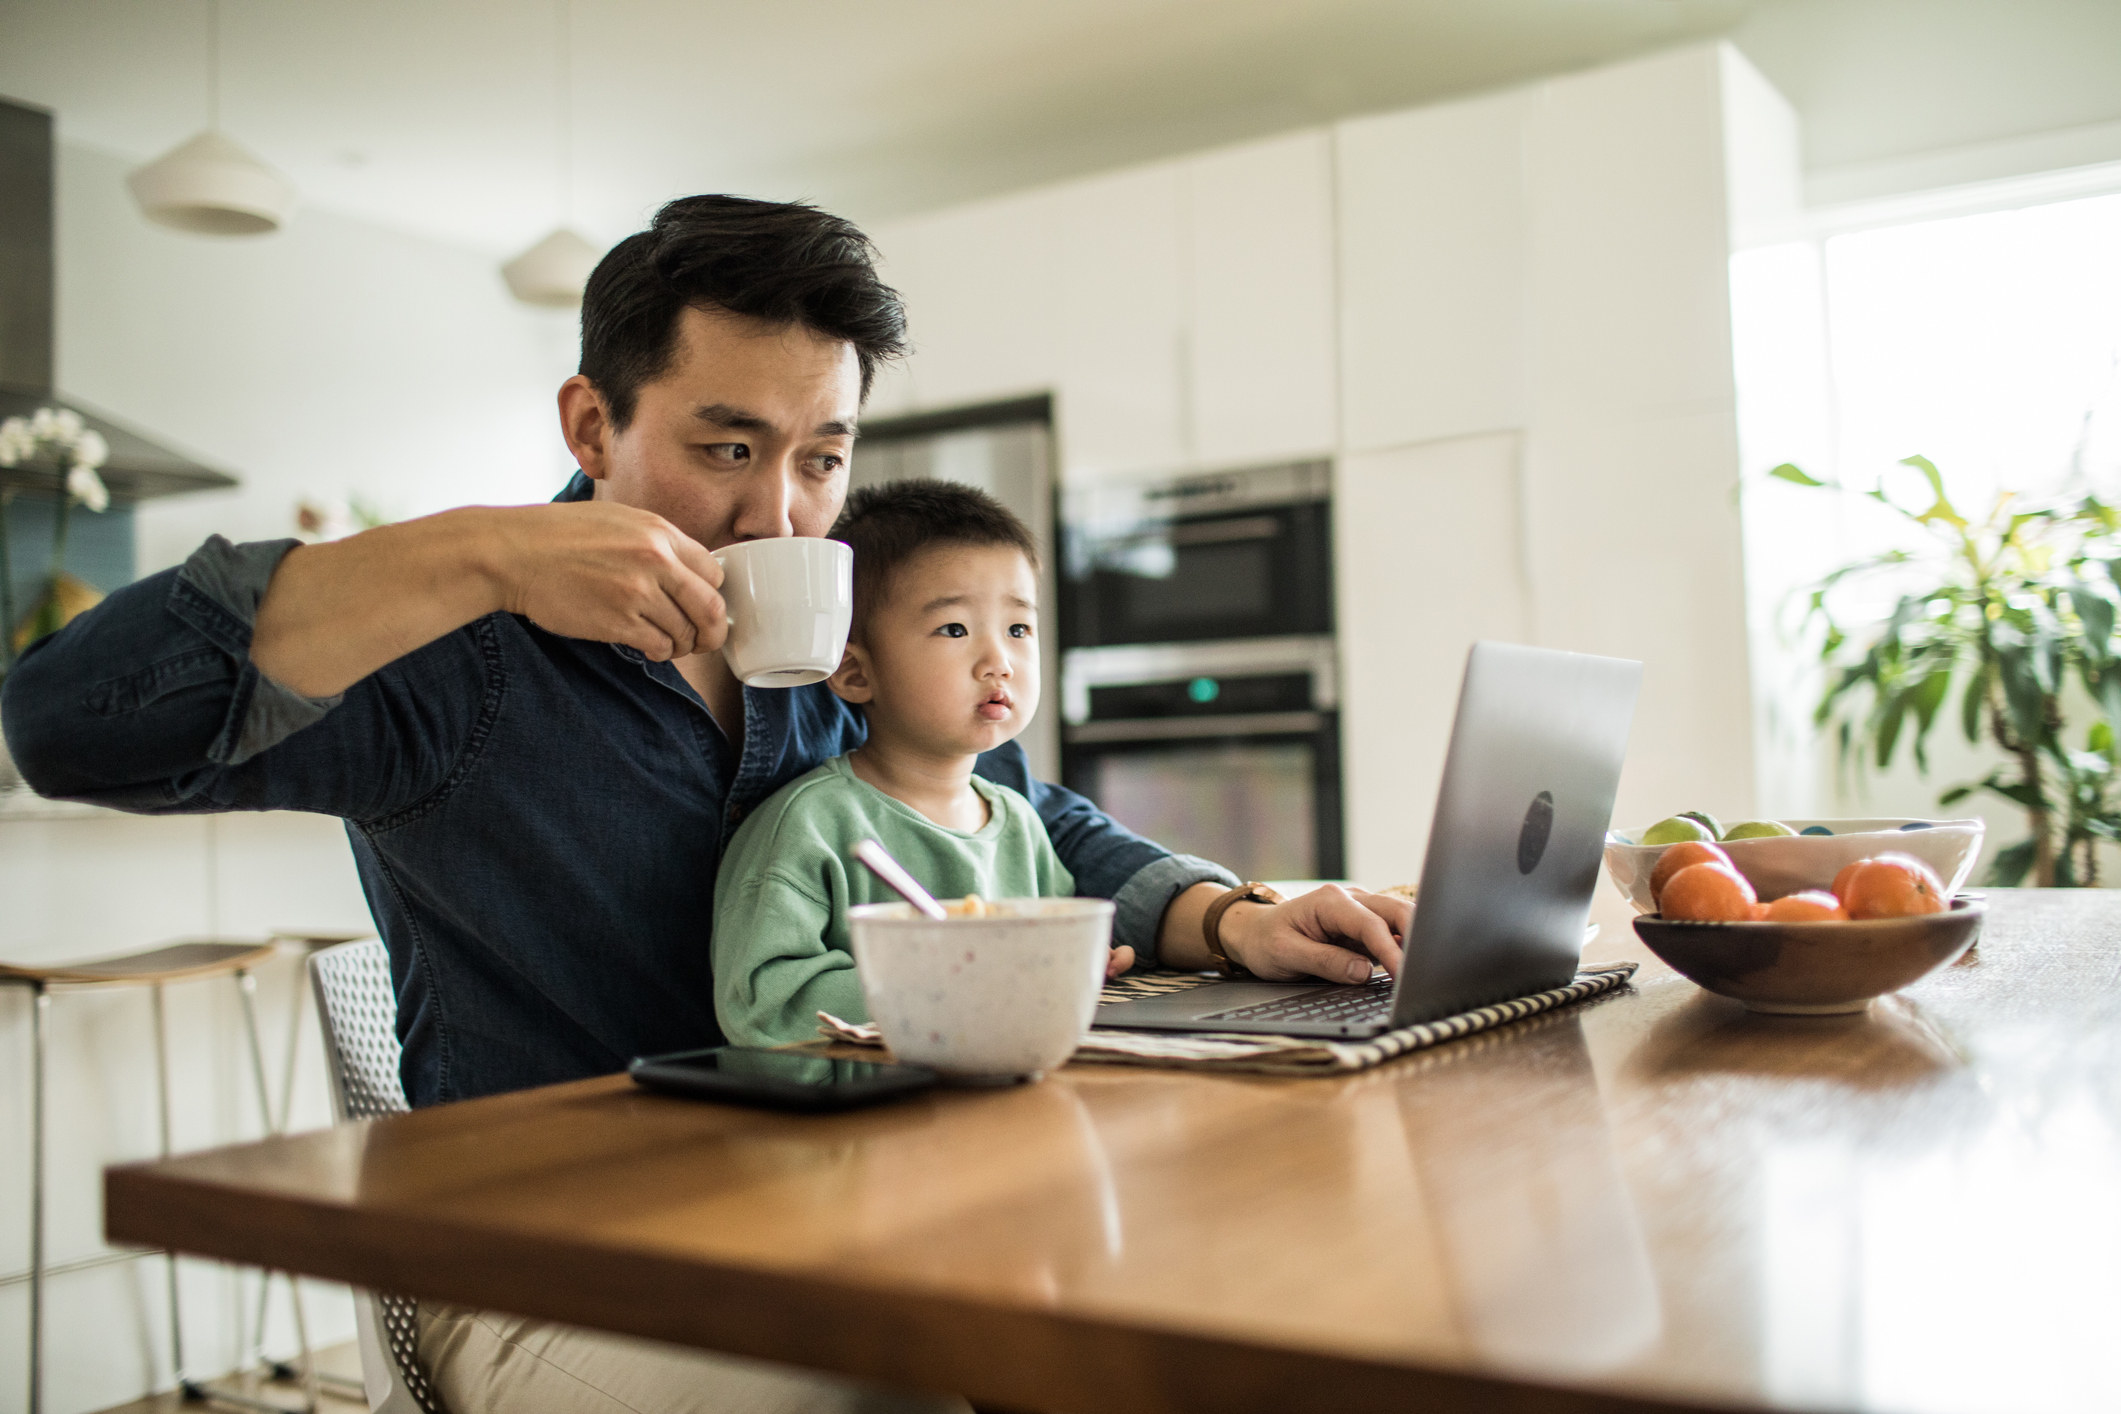 A man sitting at the dining table with his son in his lap as he sips from a mug and looks at his laptop